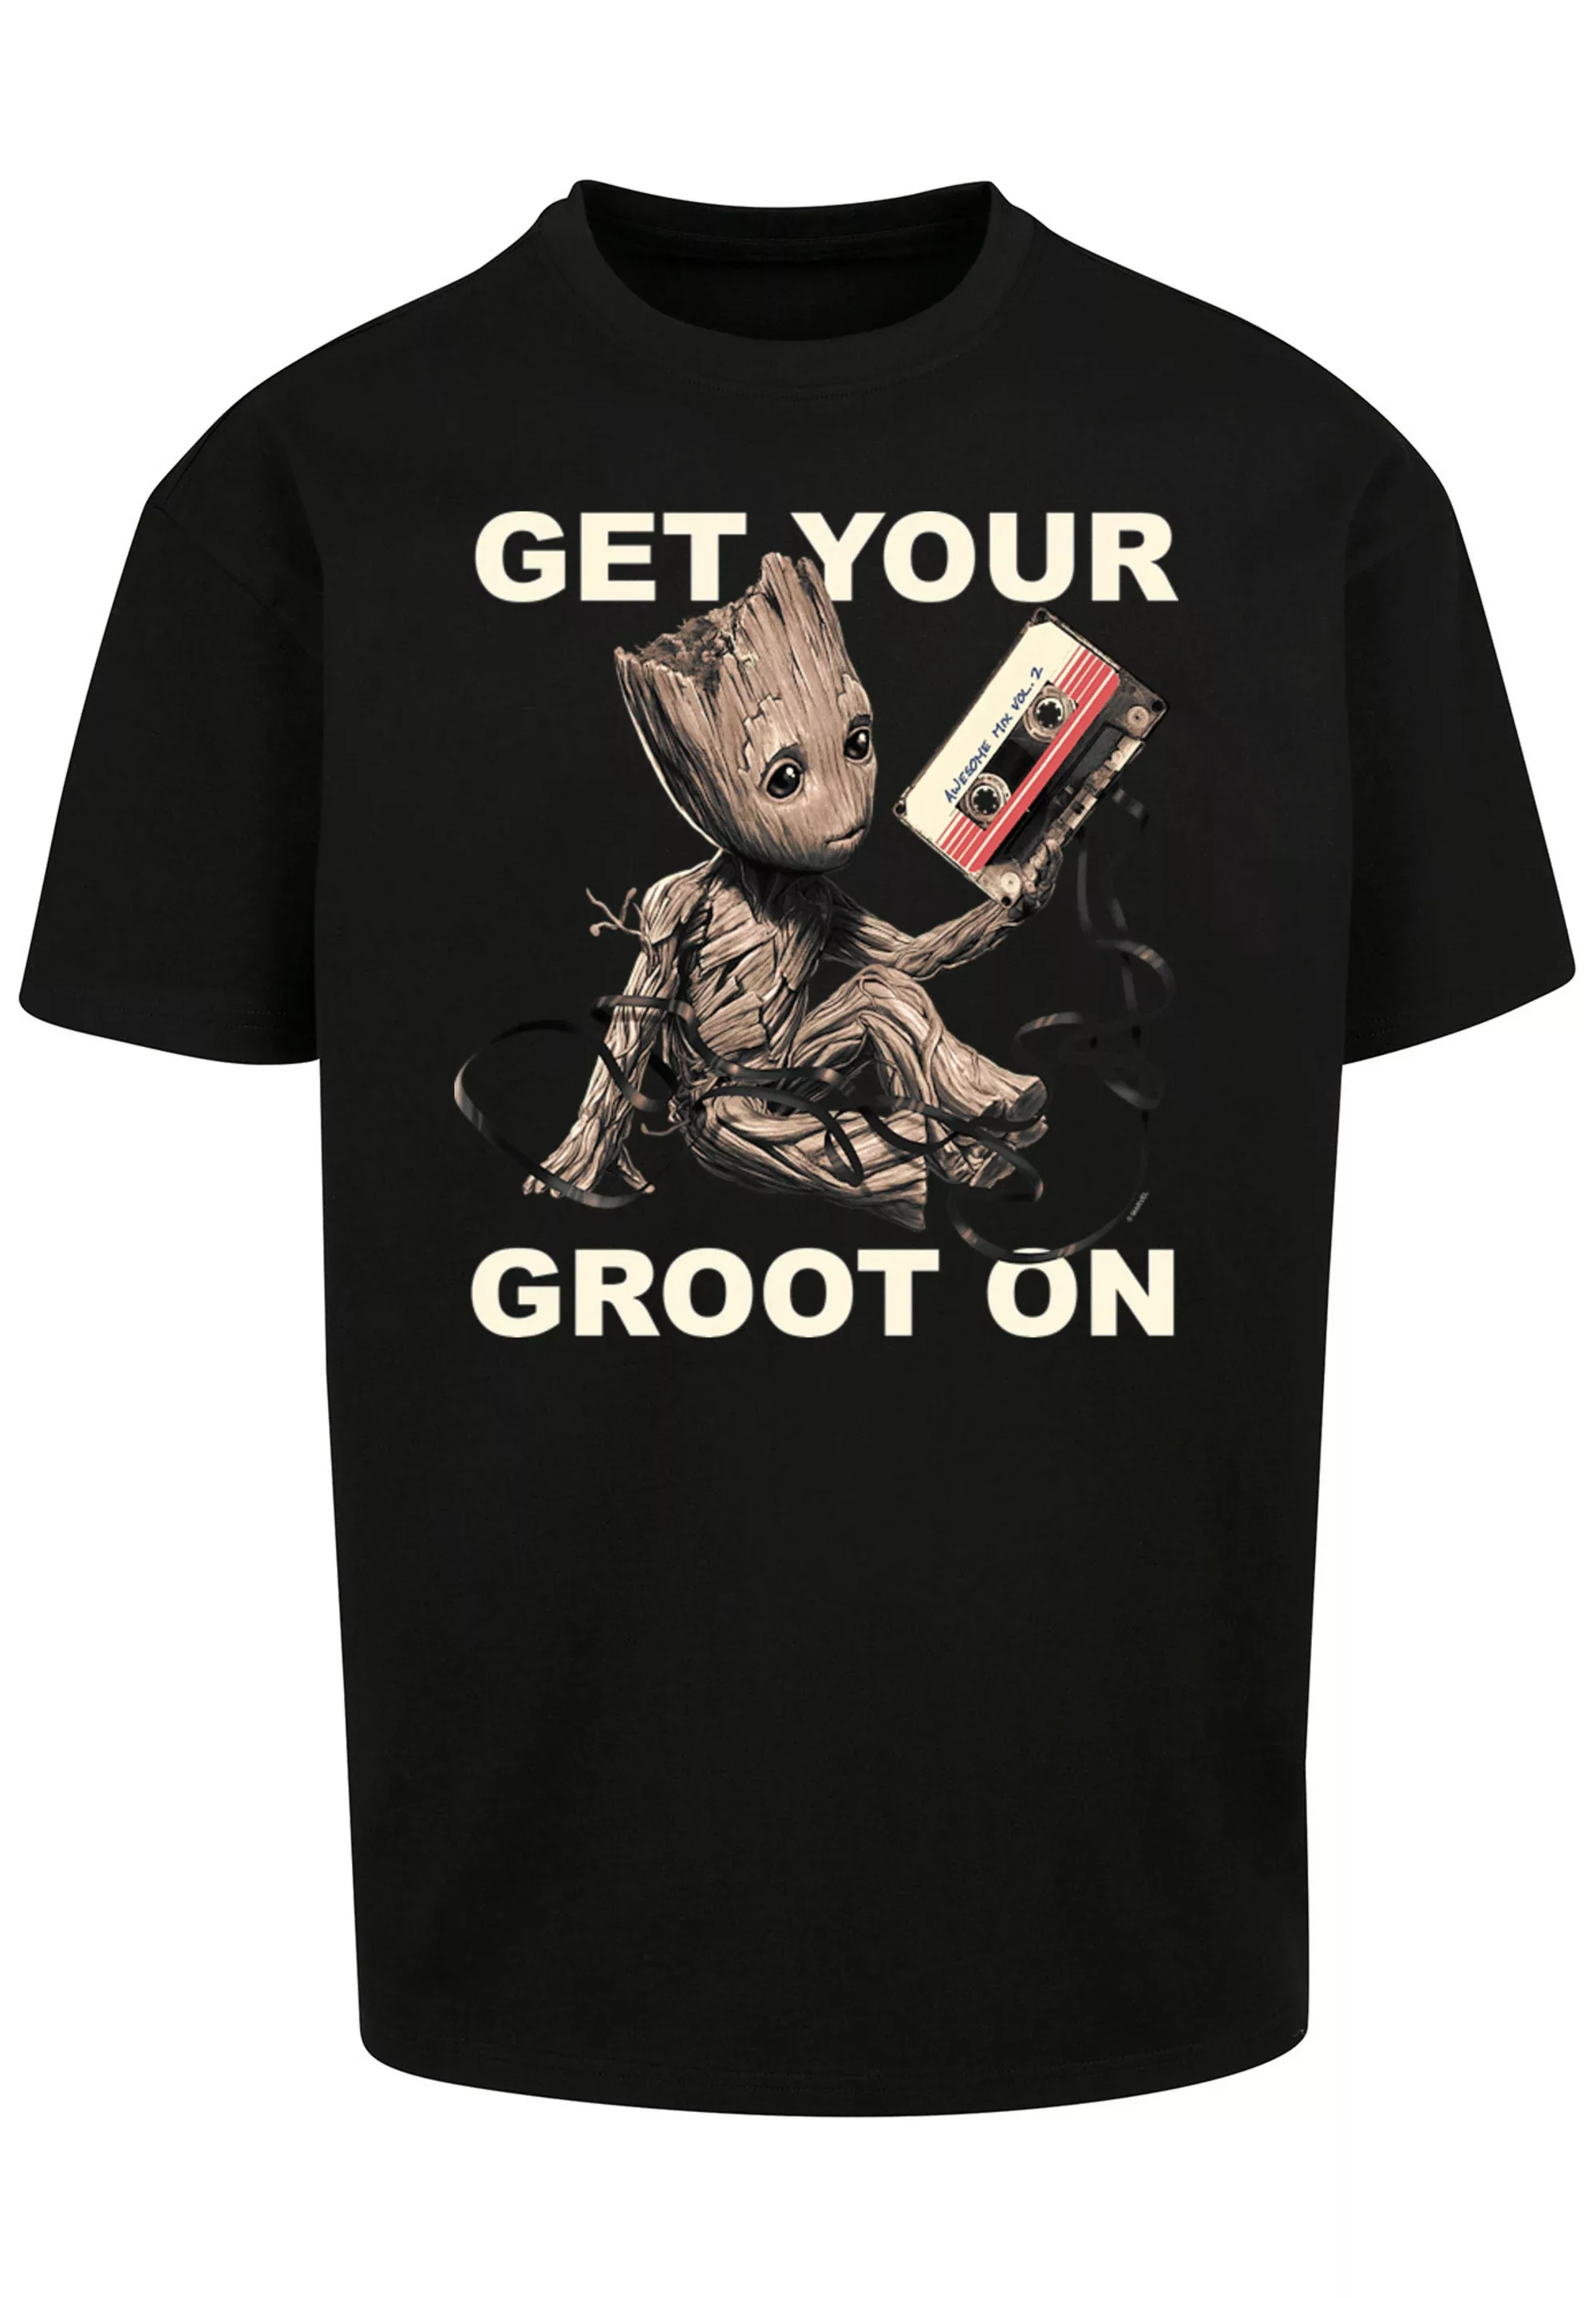 F4NT4STIC T-Shirt "Marvel Guardians of the Galaxy Get your Groot On" günstig online kaufen